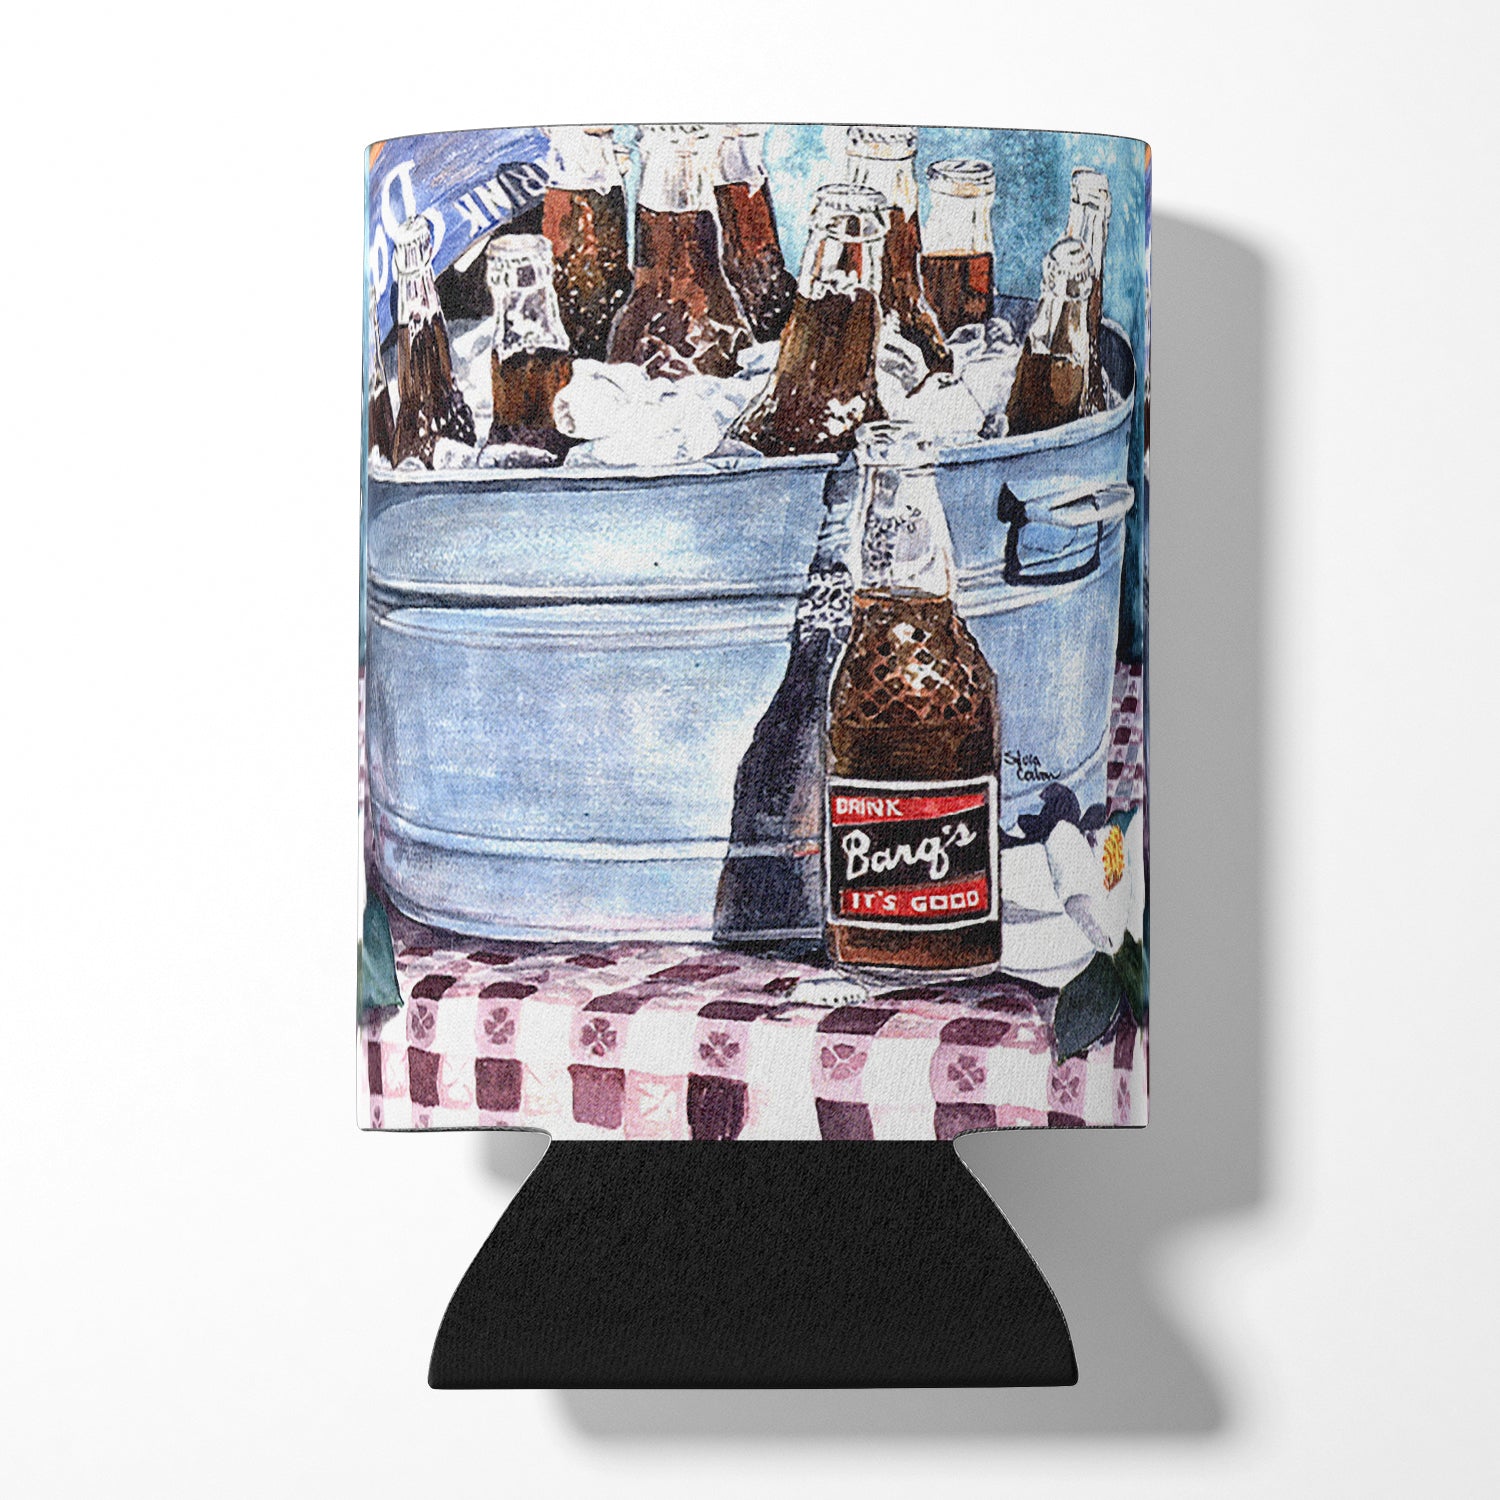 Barq's and old washtub Can or Bottle Beverage Insulator Hugger.